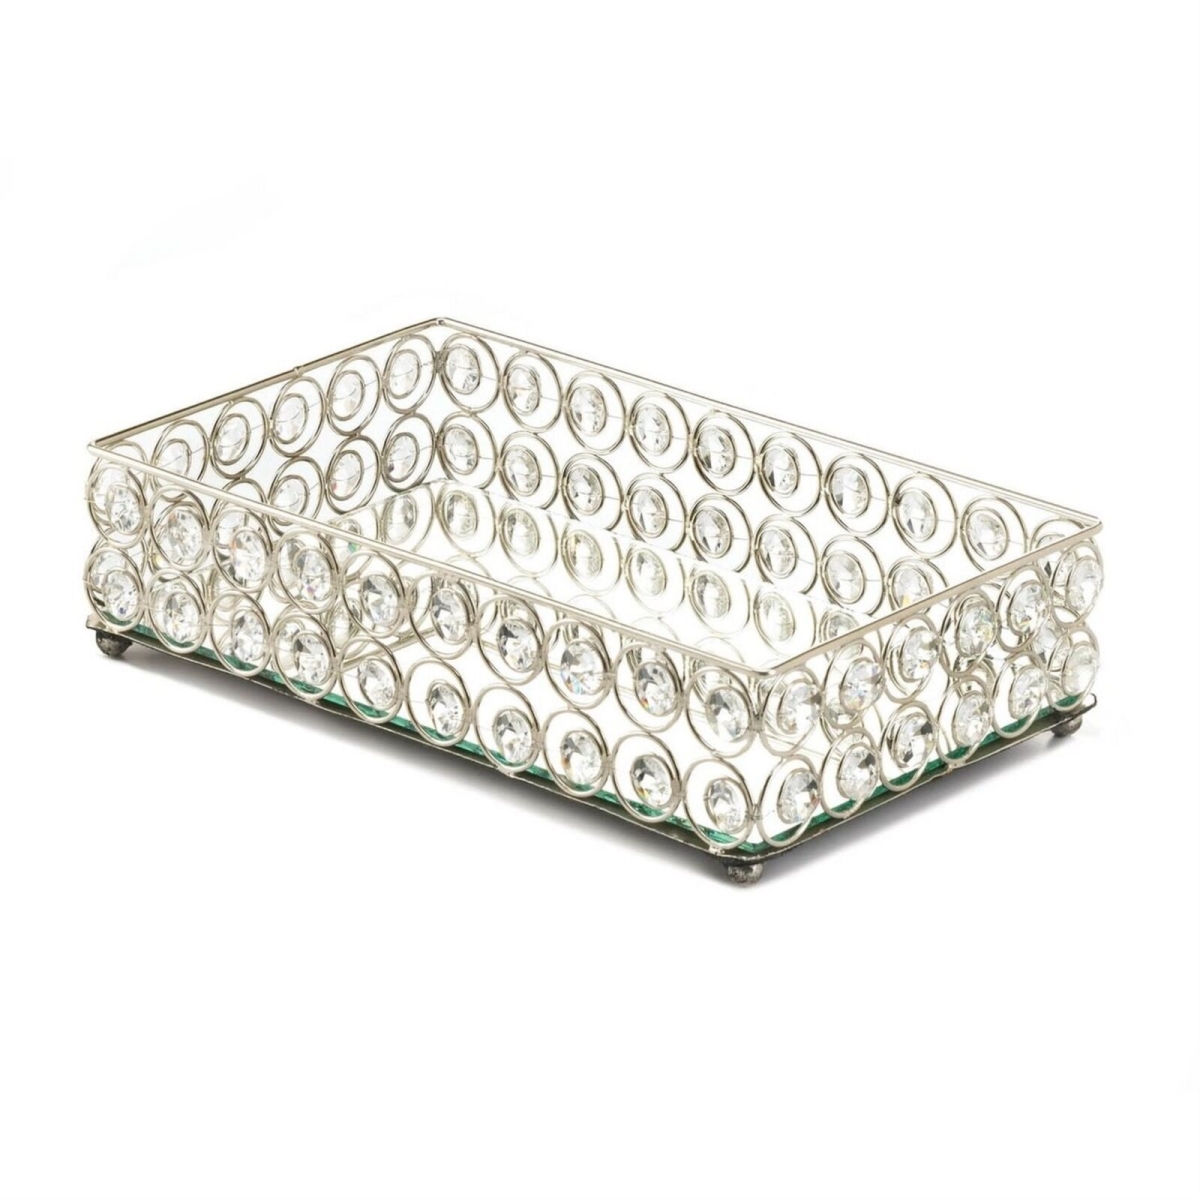 Picture of Accent Plus 10018950 Rectangular Crystal Bling Tray with Mirror Base